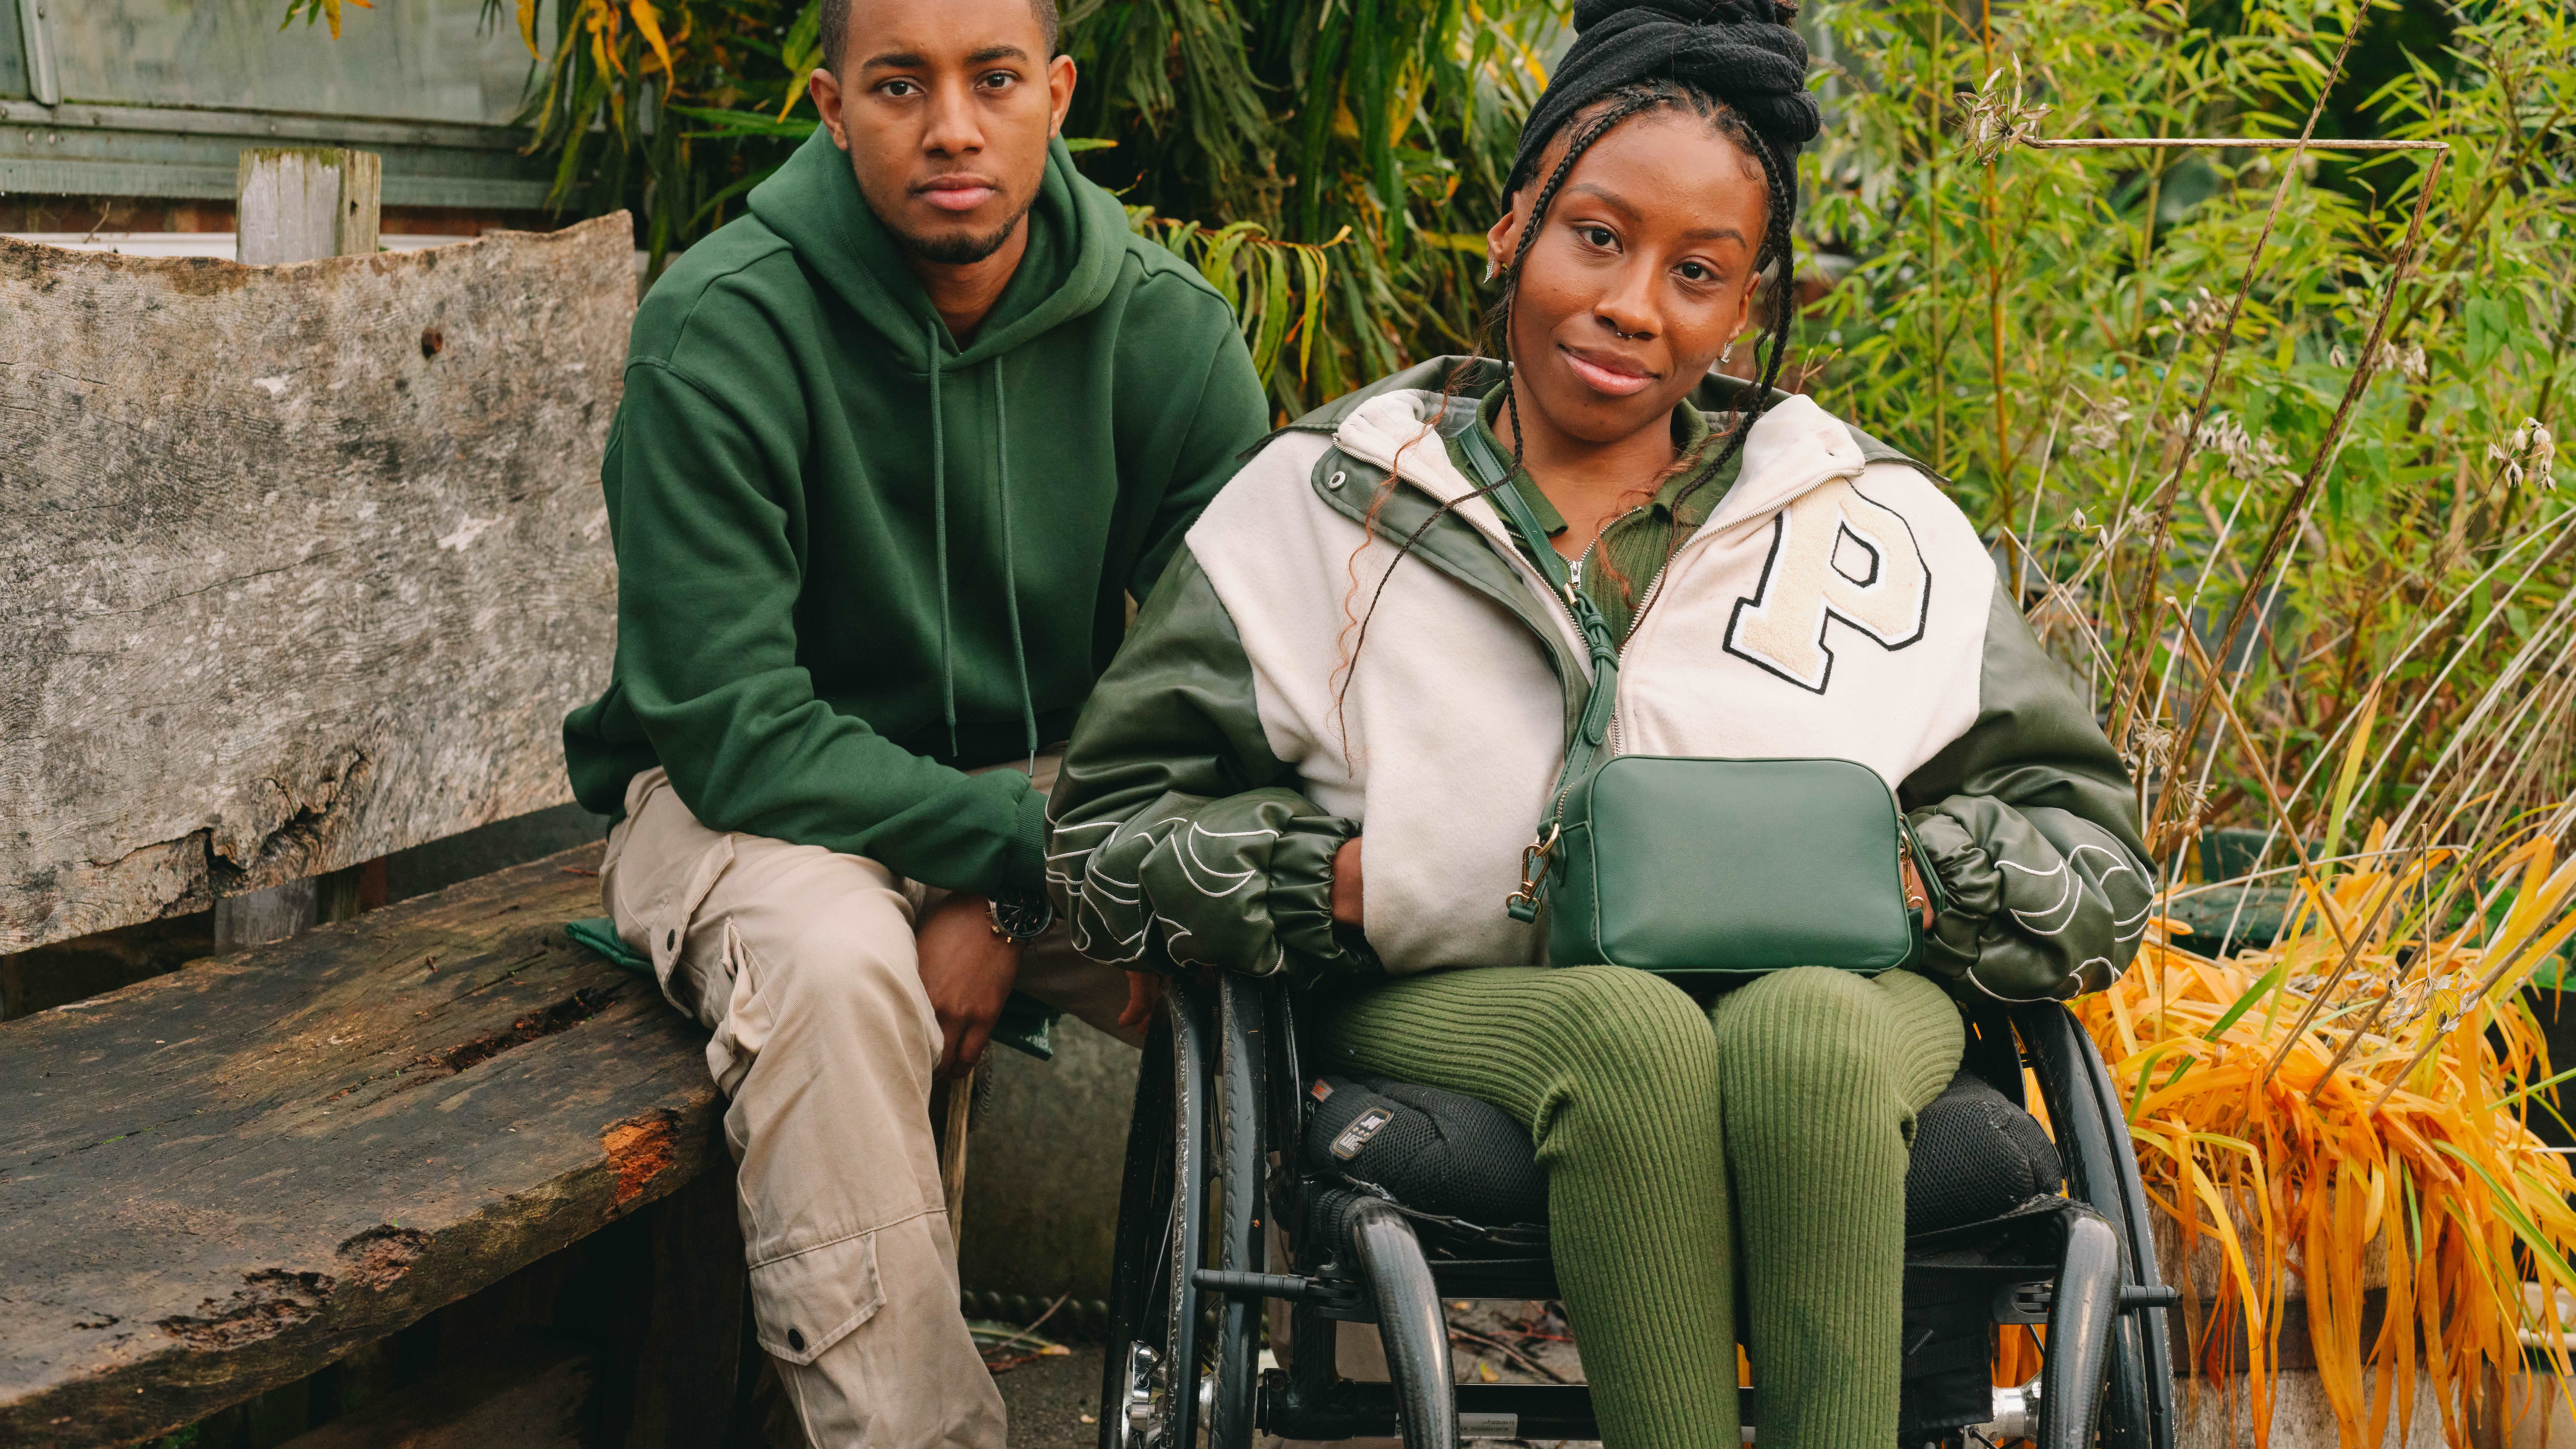 A young Black woman in a wheelchair and a young Black man on a bench, both staring at the camera looking serious.